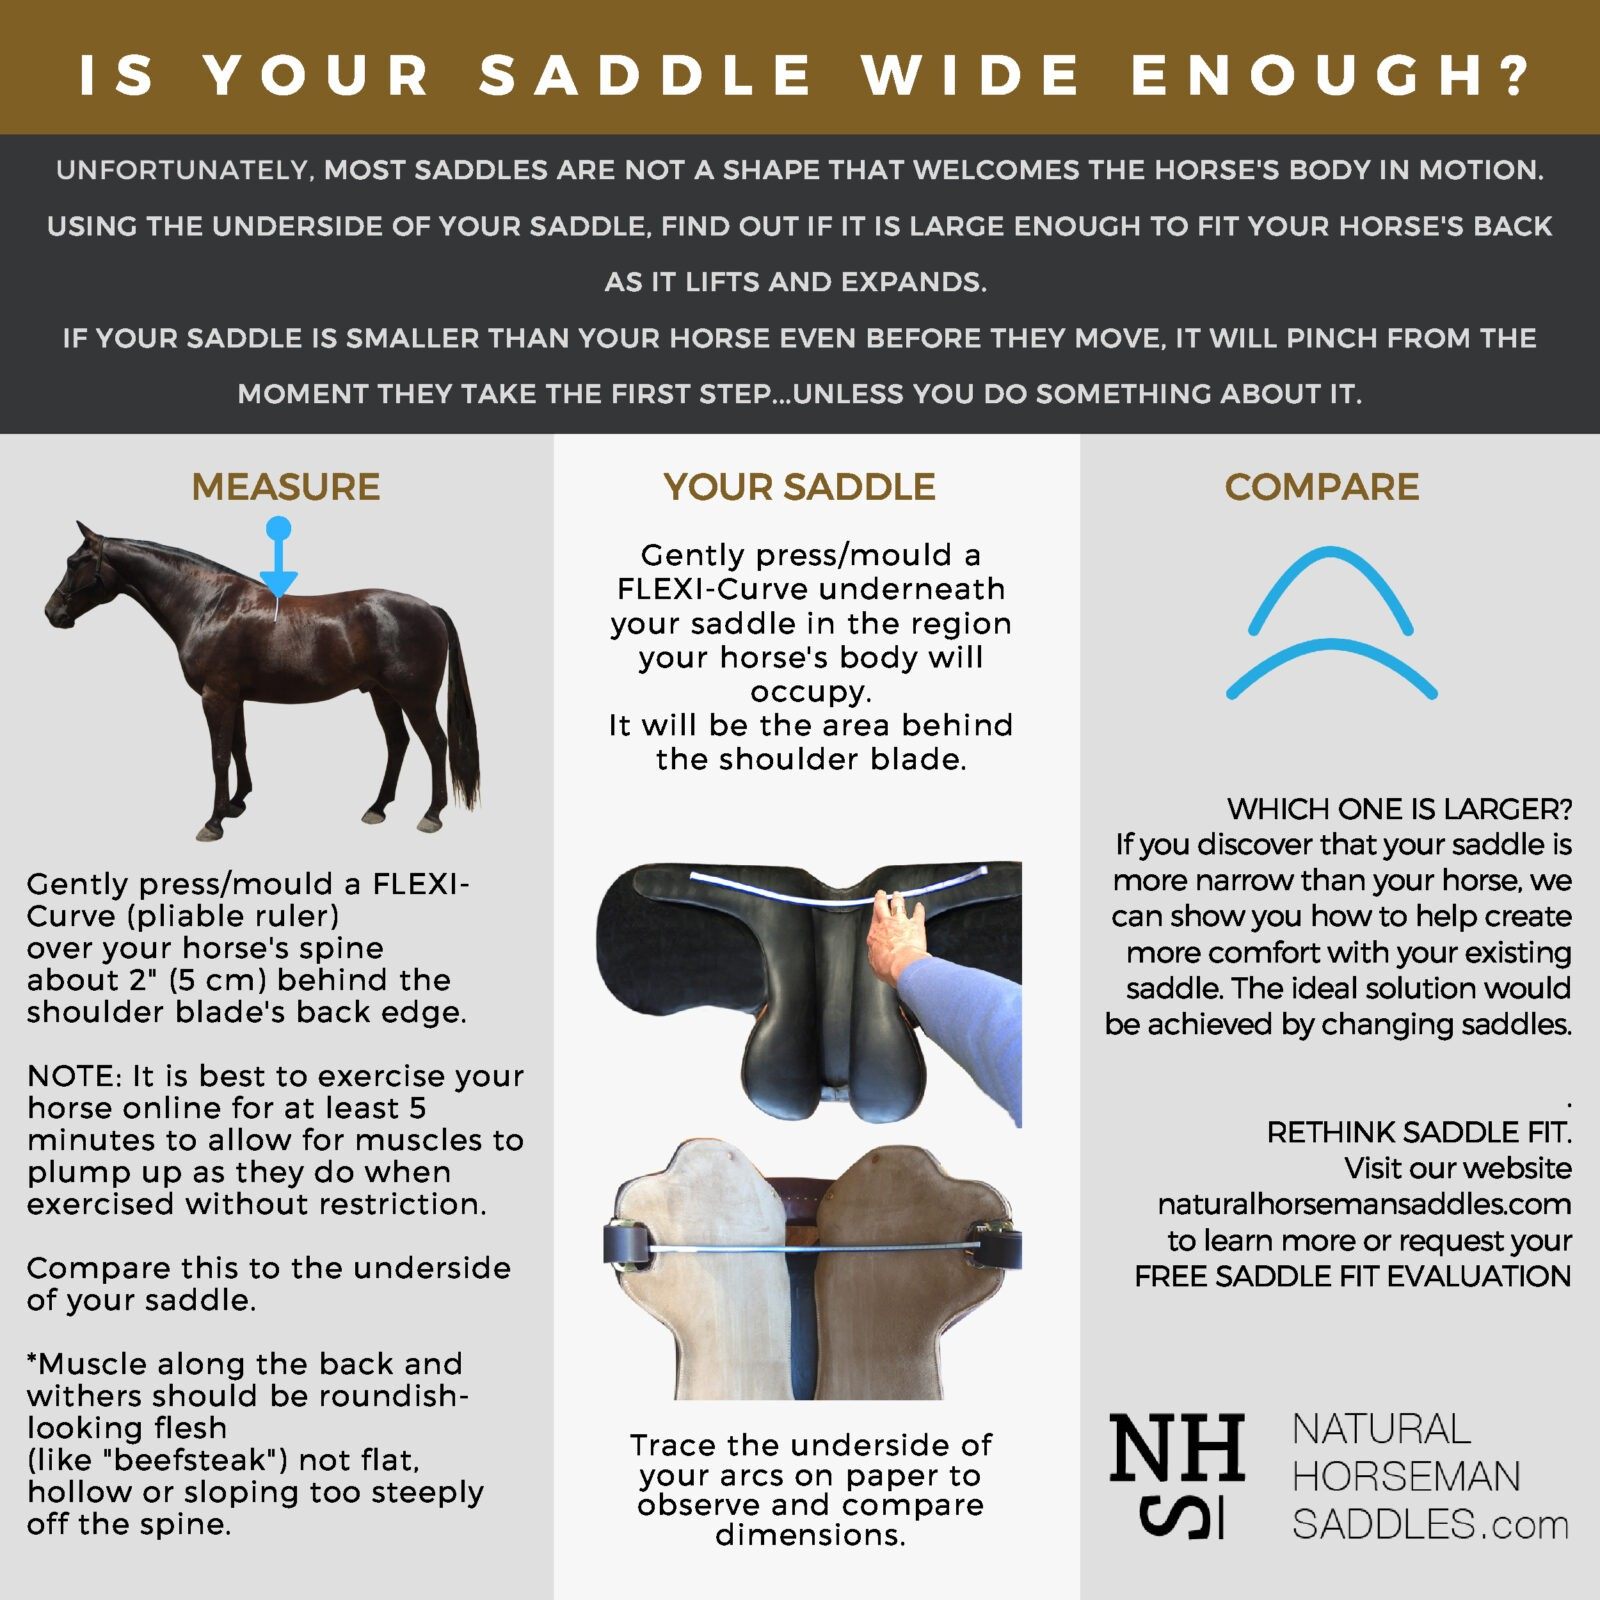 Is your saddle wide enough? Take our test.